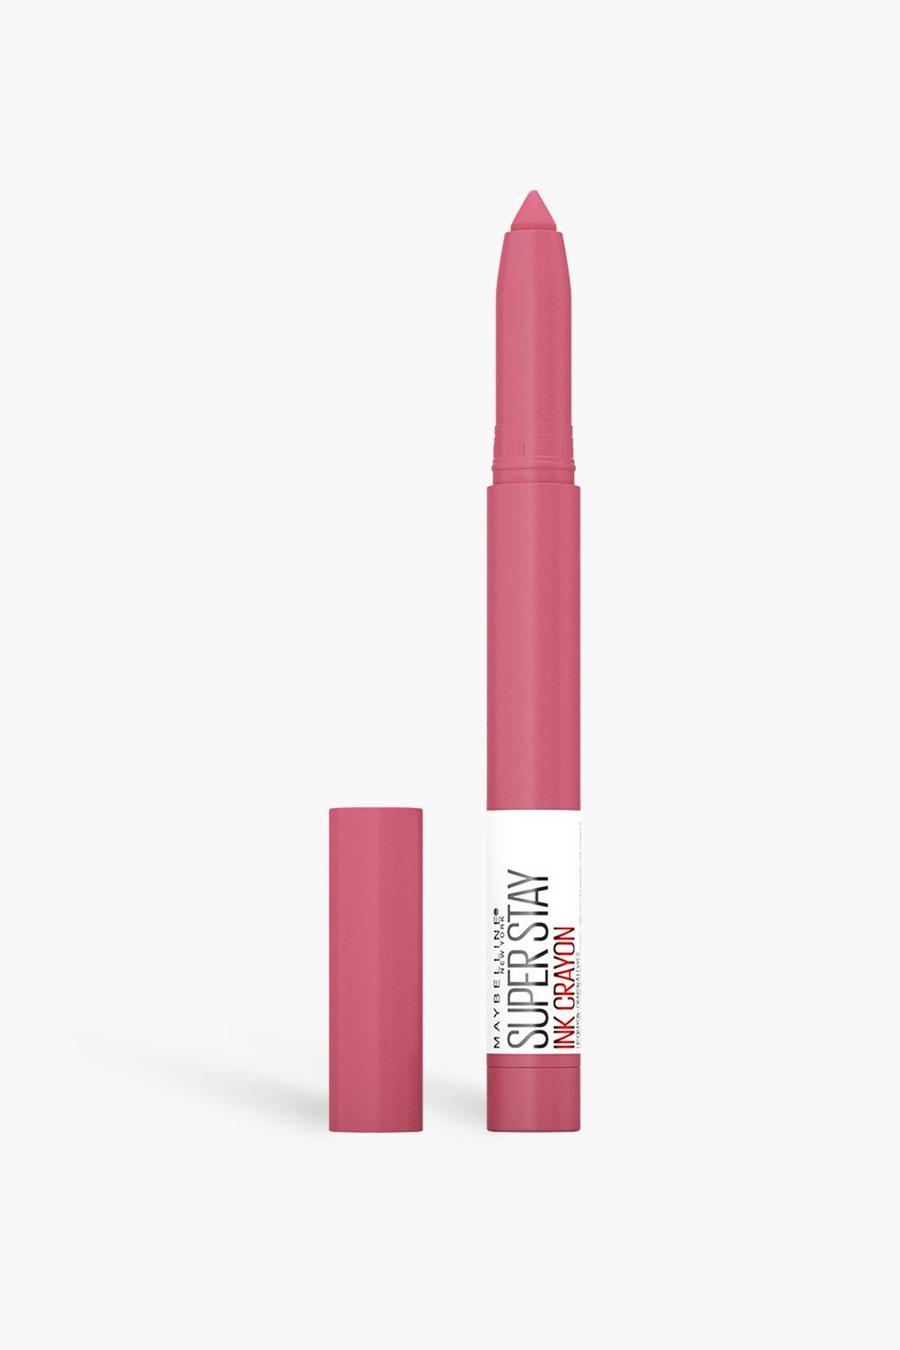 Maybelline Superstay Crayon Läppenna - Keep It Fun image number 1